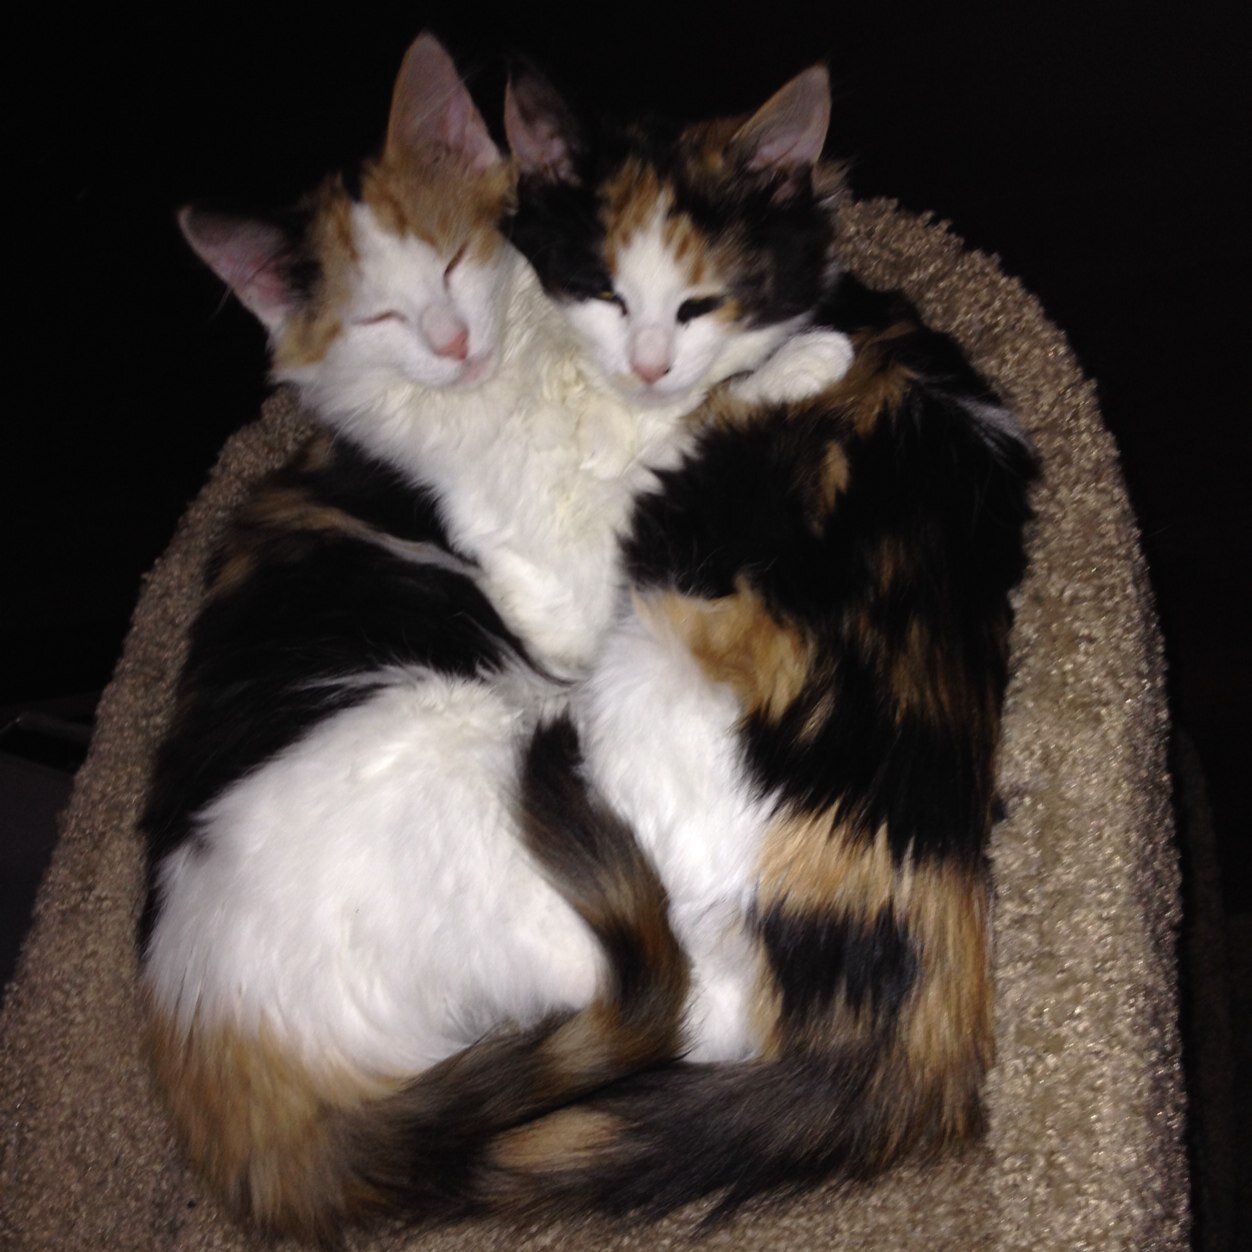 Calico sisters. We love meeting new friends from all over the world! Big Sisfur is @LucyLuCats